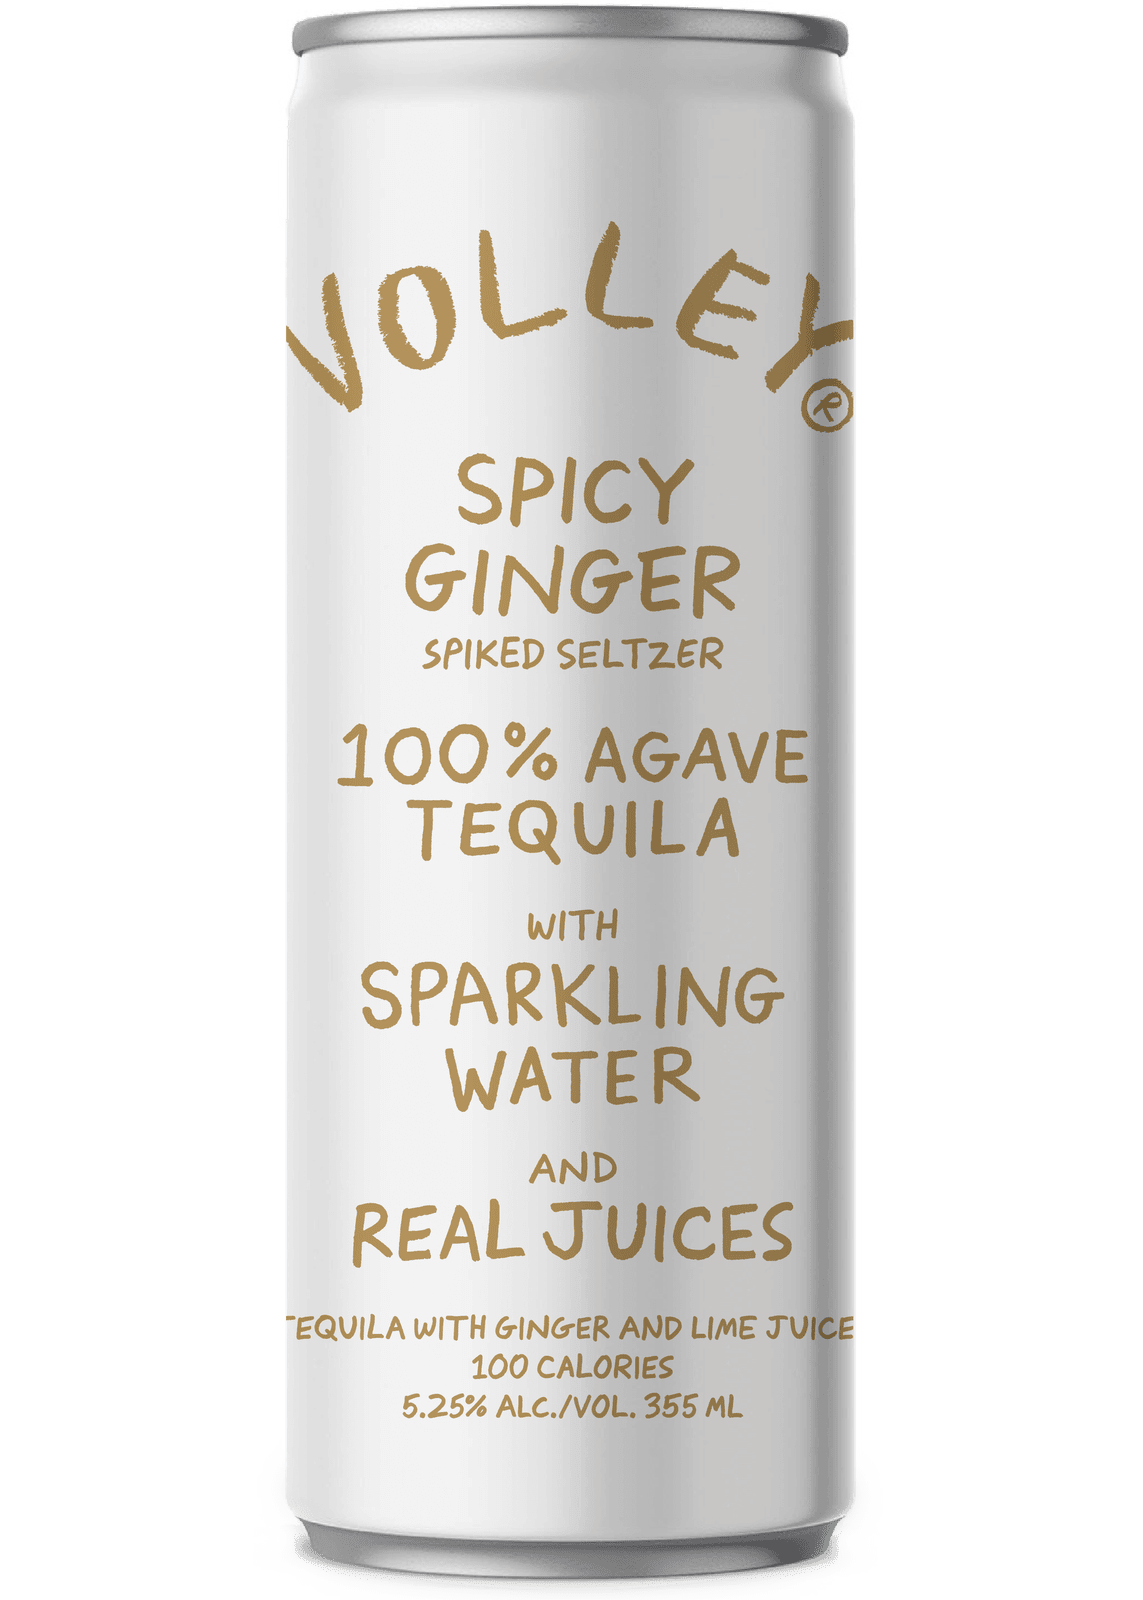 VOLLEY TEQUILA SELTZER Spicy Ginger